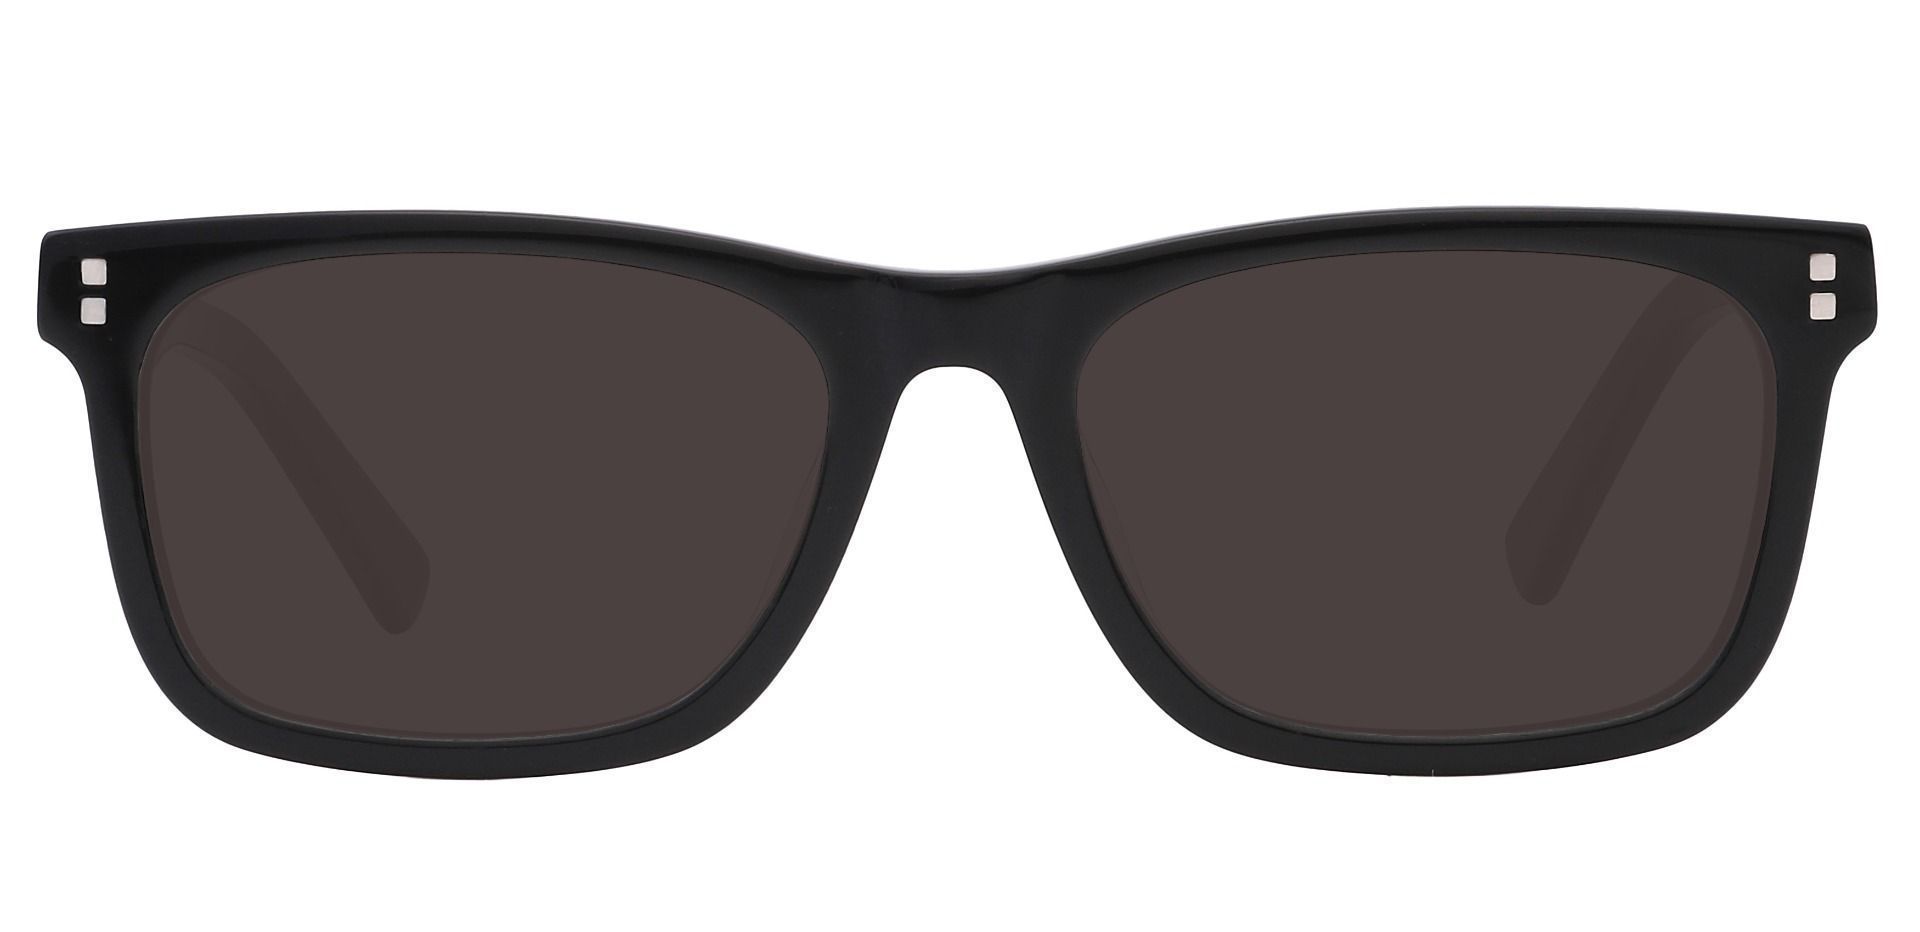 Liberty Rectangle Lined Bifocal Sunglasses - Black Frame With Gray Lenses